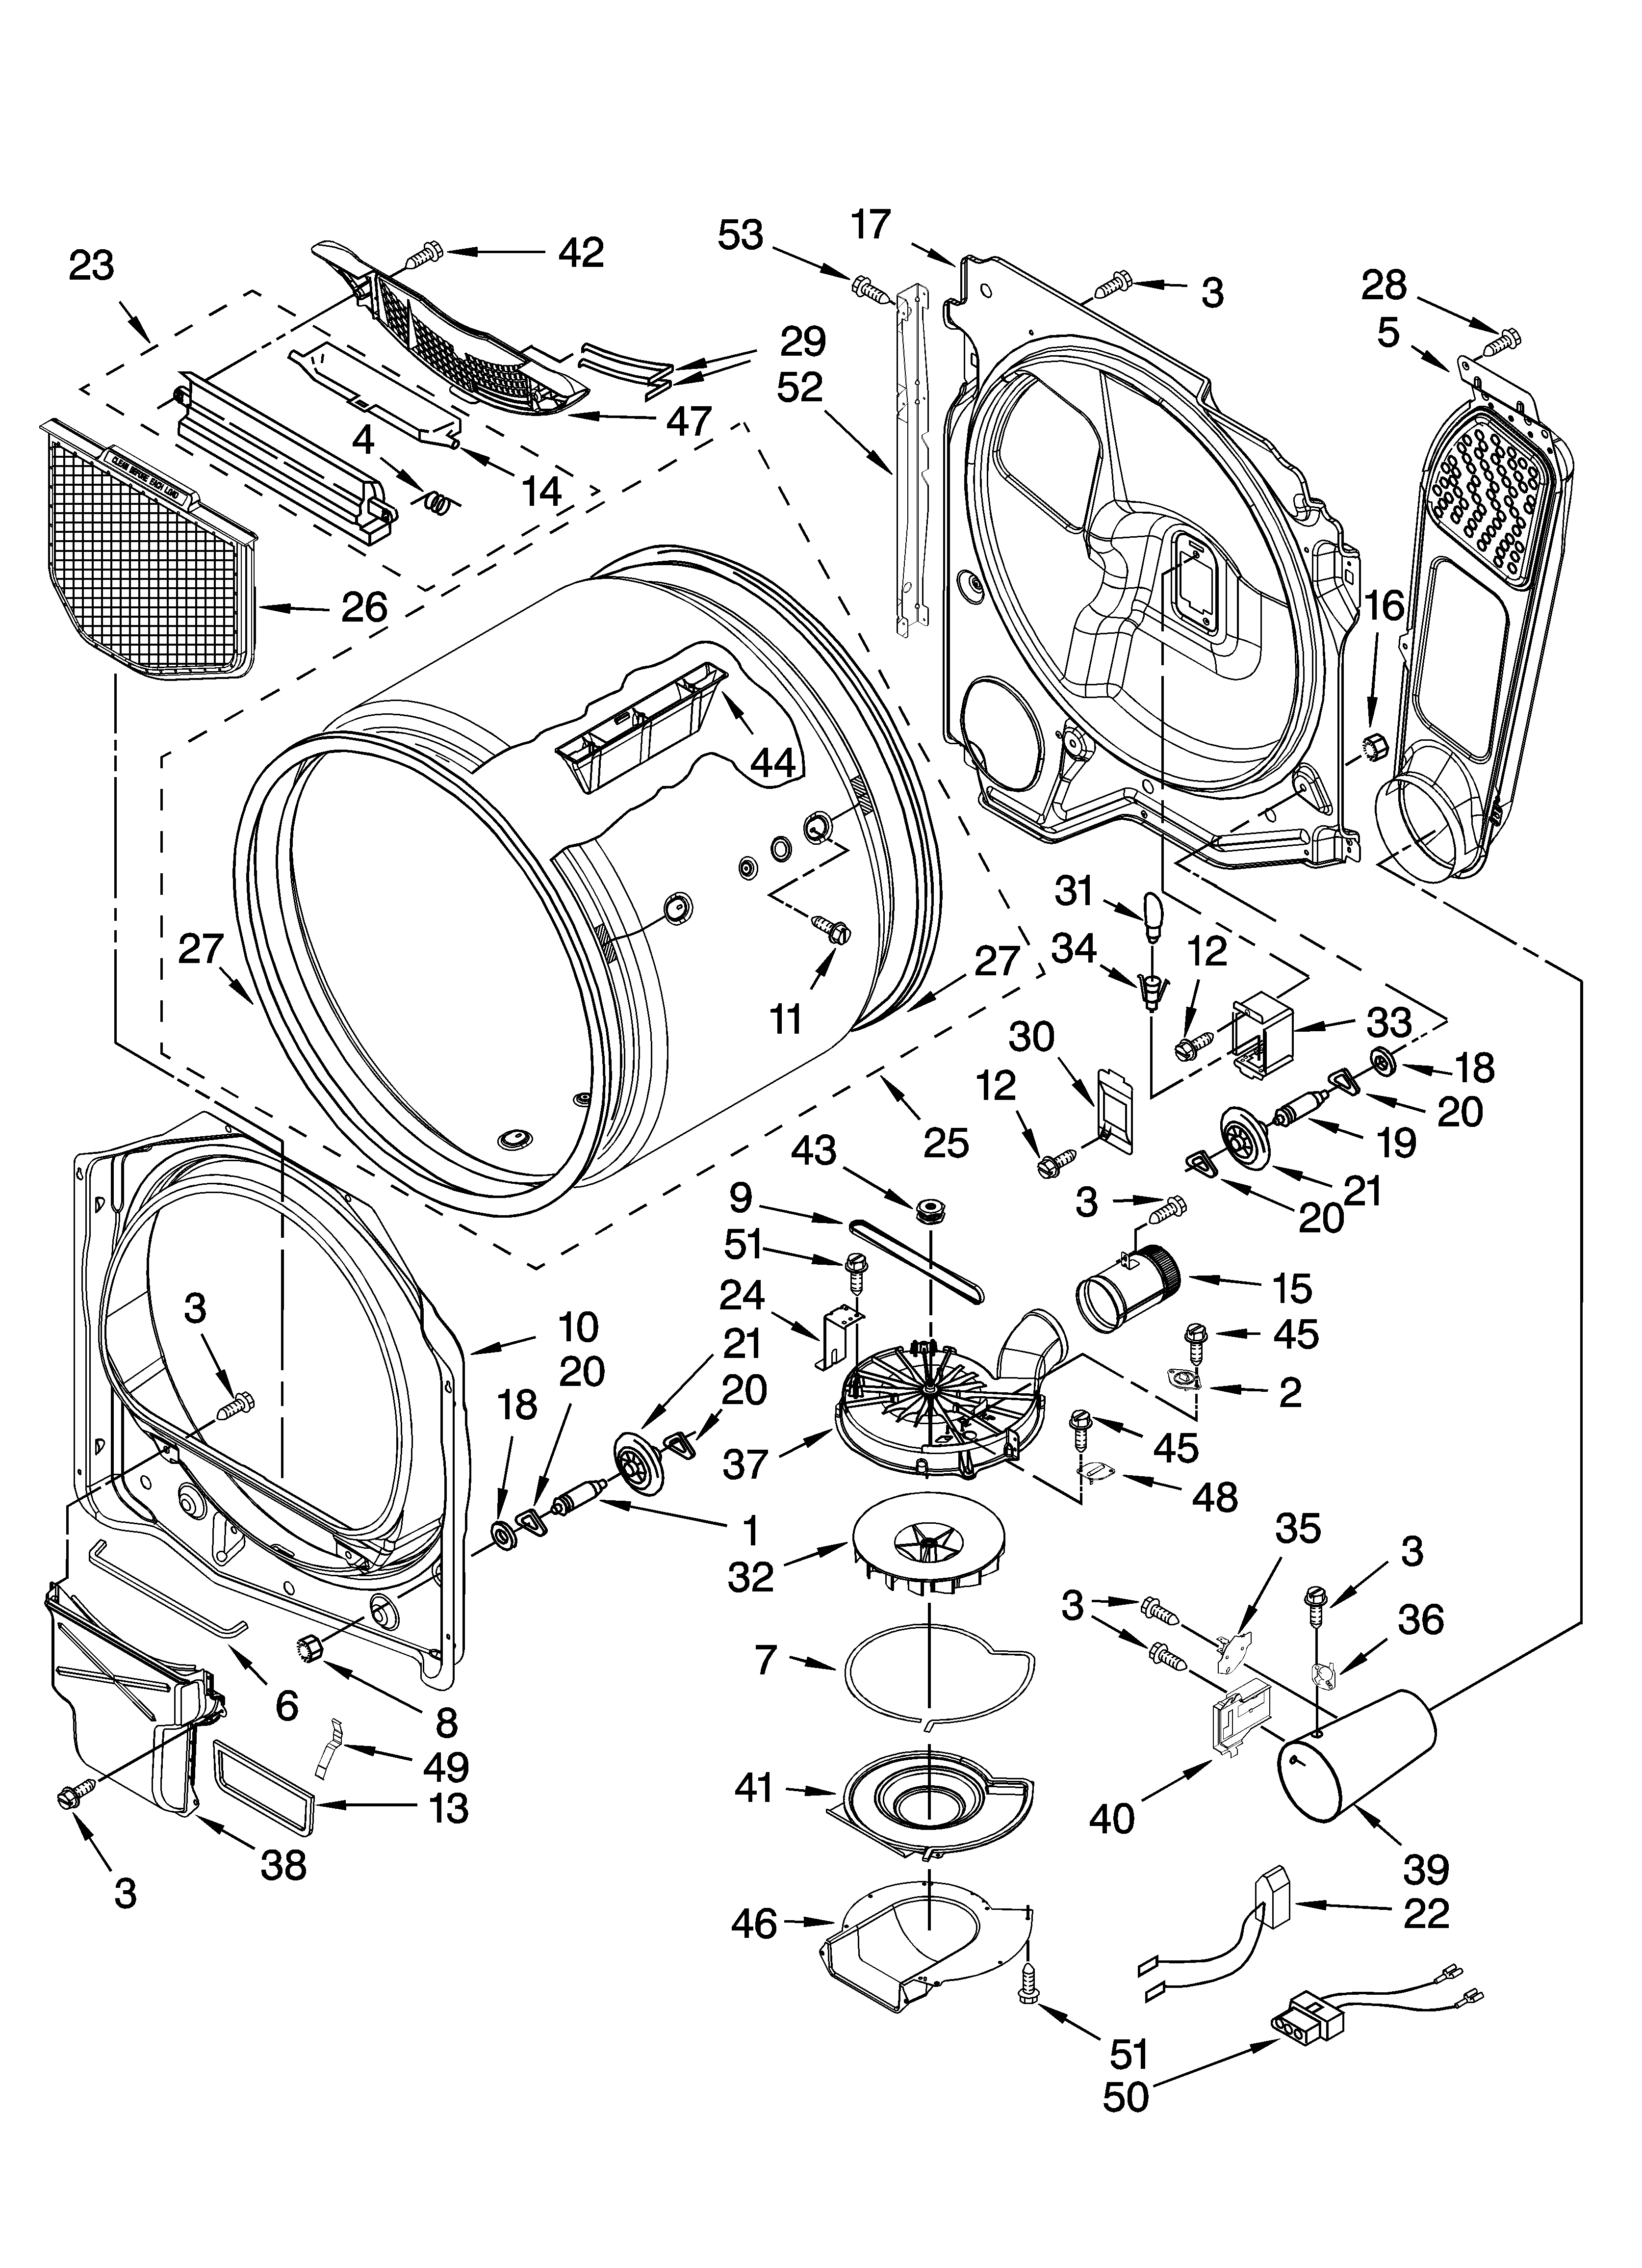 Maytag Washer Wiring Diagram from c.searspartsdirect.com